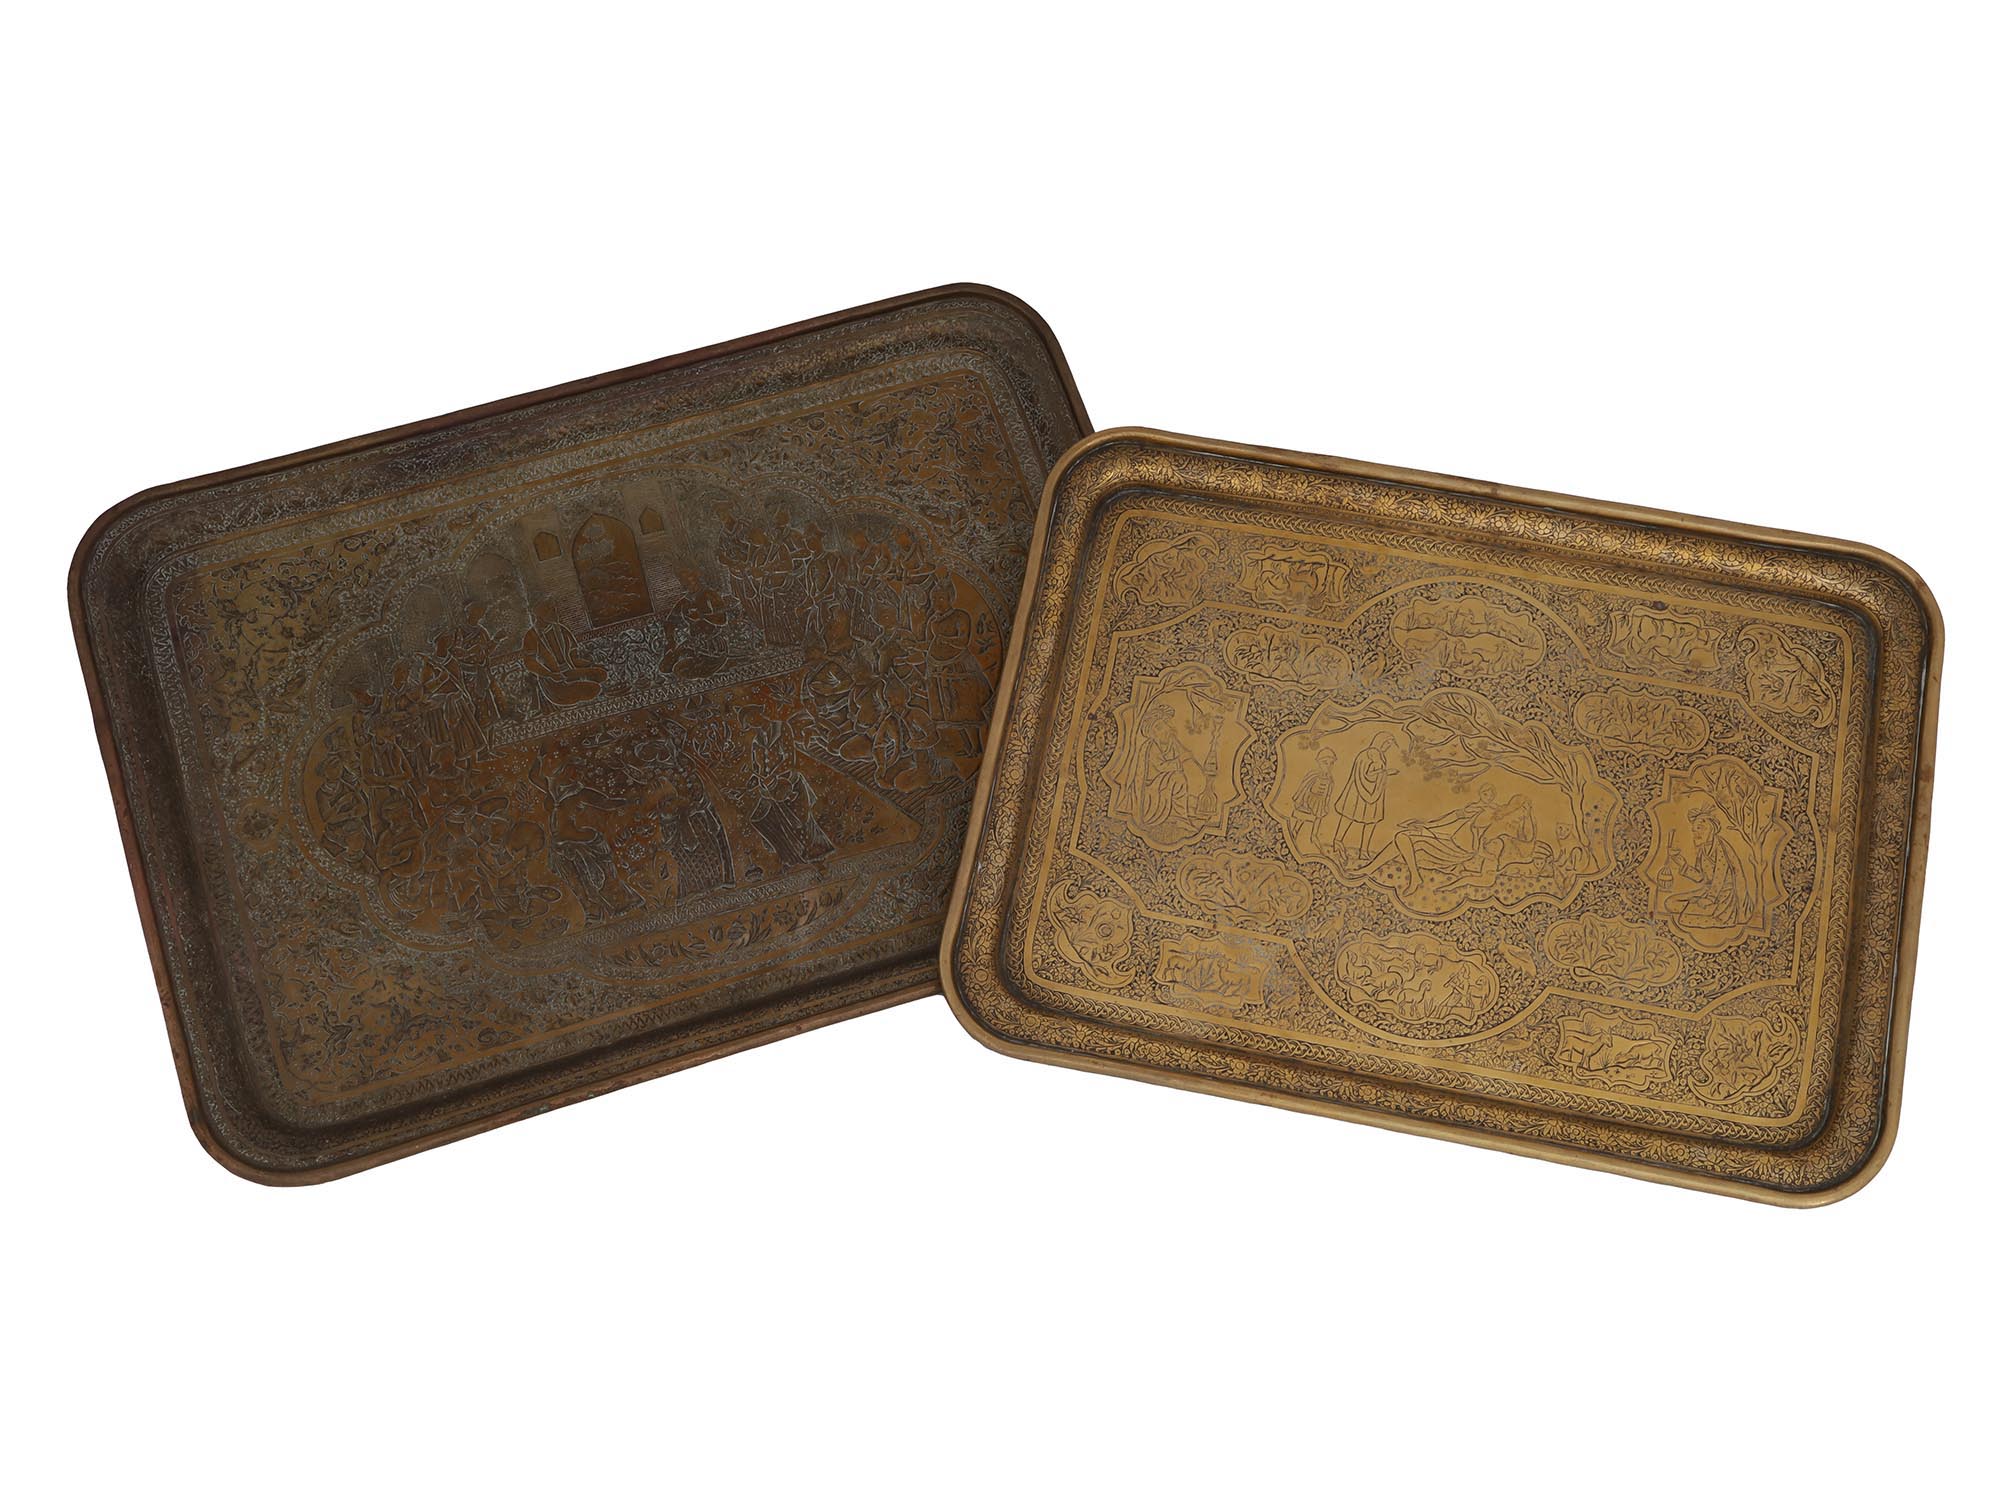 TWO ANTIQUE PERSIAN ENGRAVED BRASS SERVING TRAYS PIC-0